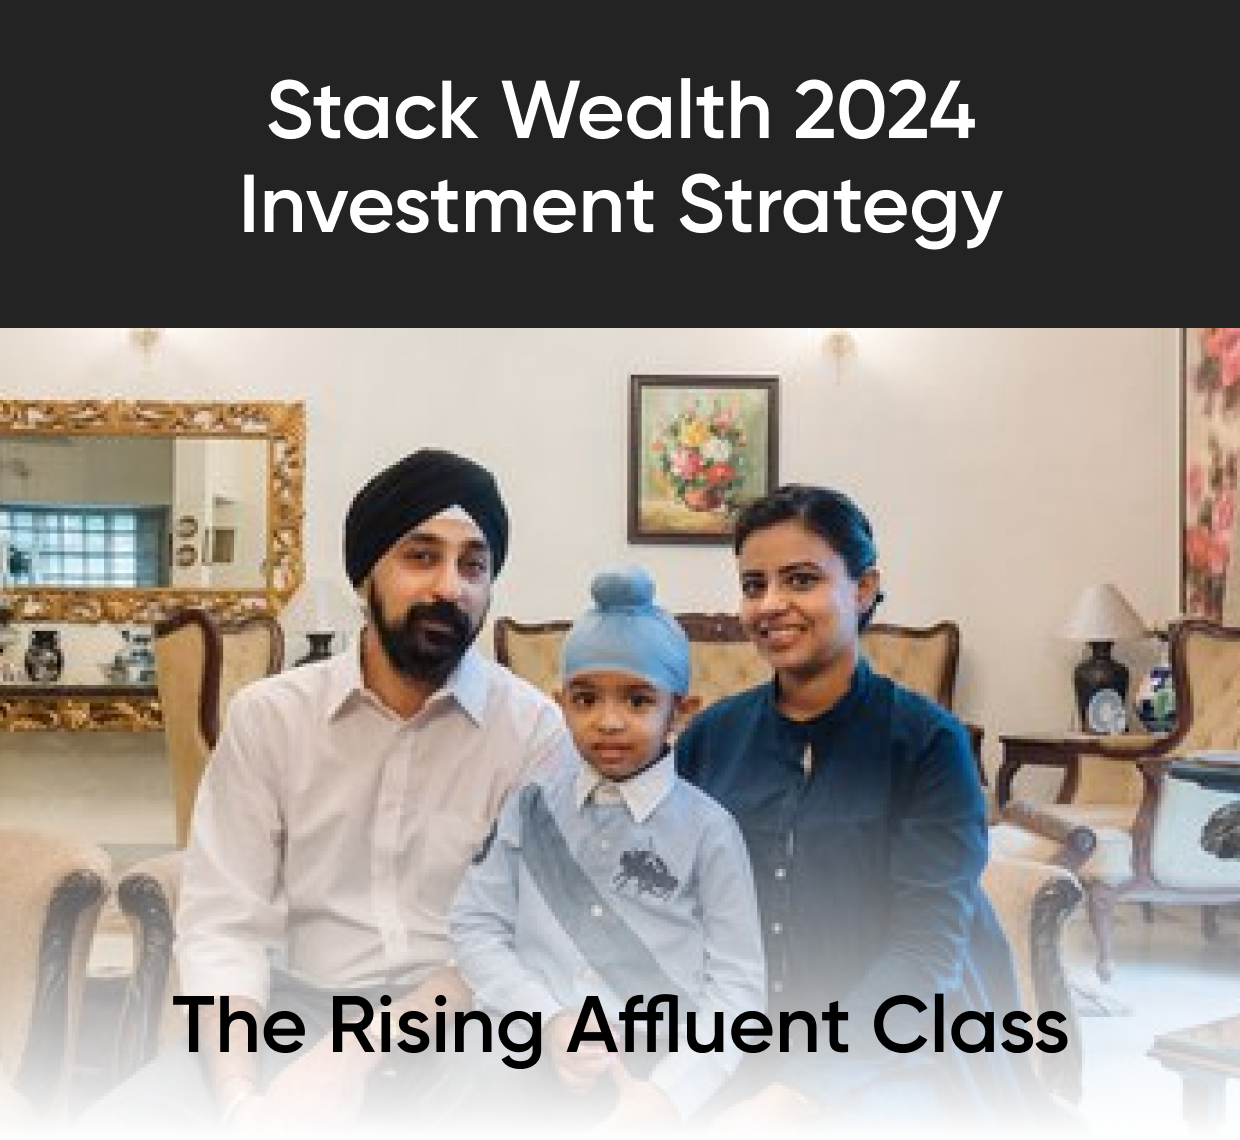 Stack Wealth 2024 Investment Strategy: The Rising Affluent Class